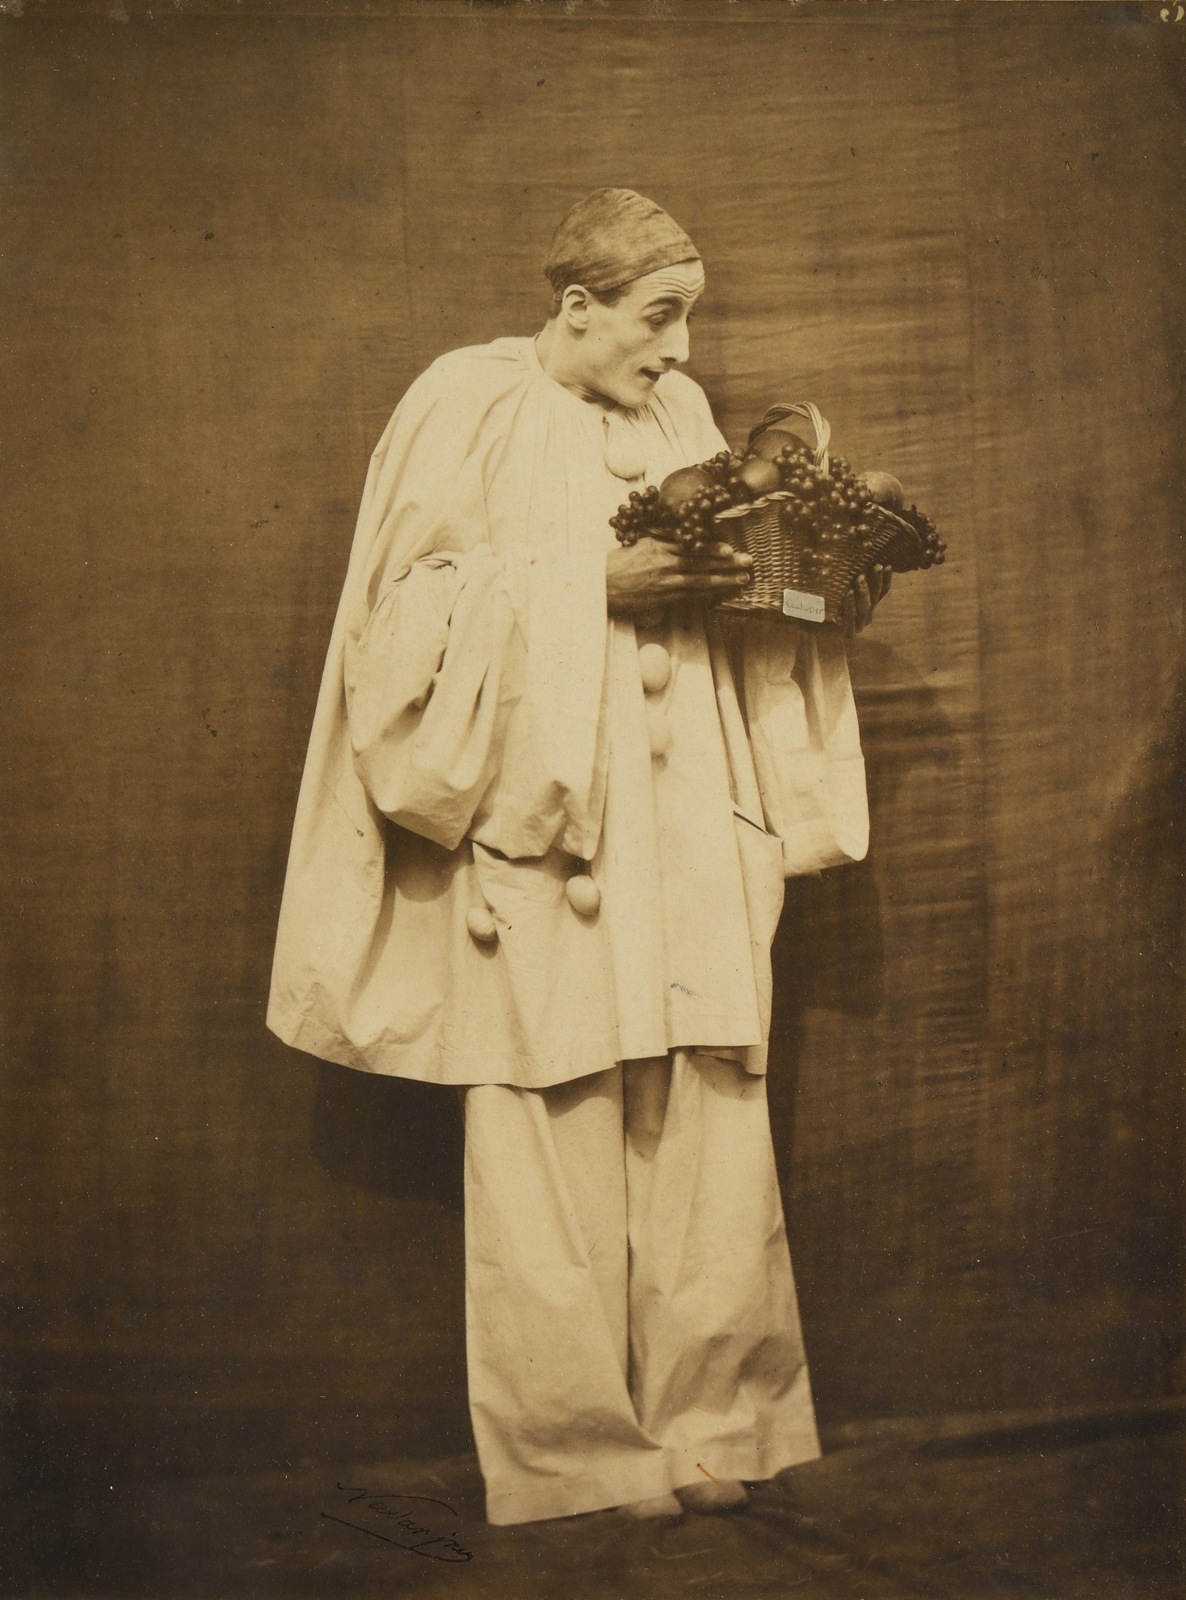 NADAR (Gaspard-F&eacute;lix Tournachon) and Adrien TOURNACHON (French, 1820-1910 and 1825-1903) Pierrot with fruit, 1854-1855 Gelatin coated salt print (vernis-cuir) 28.0 x 20.9 cm